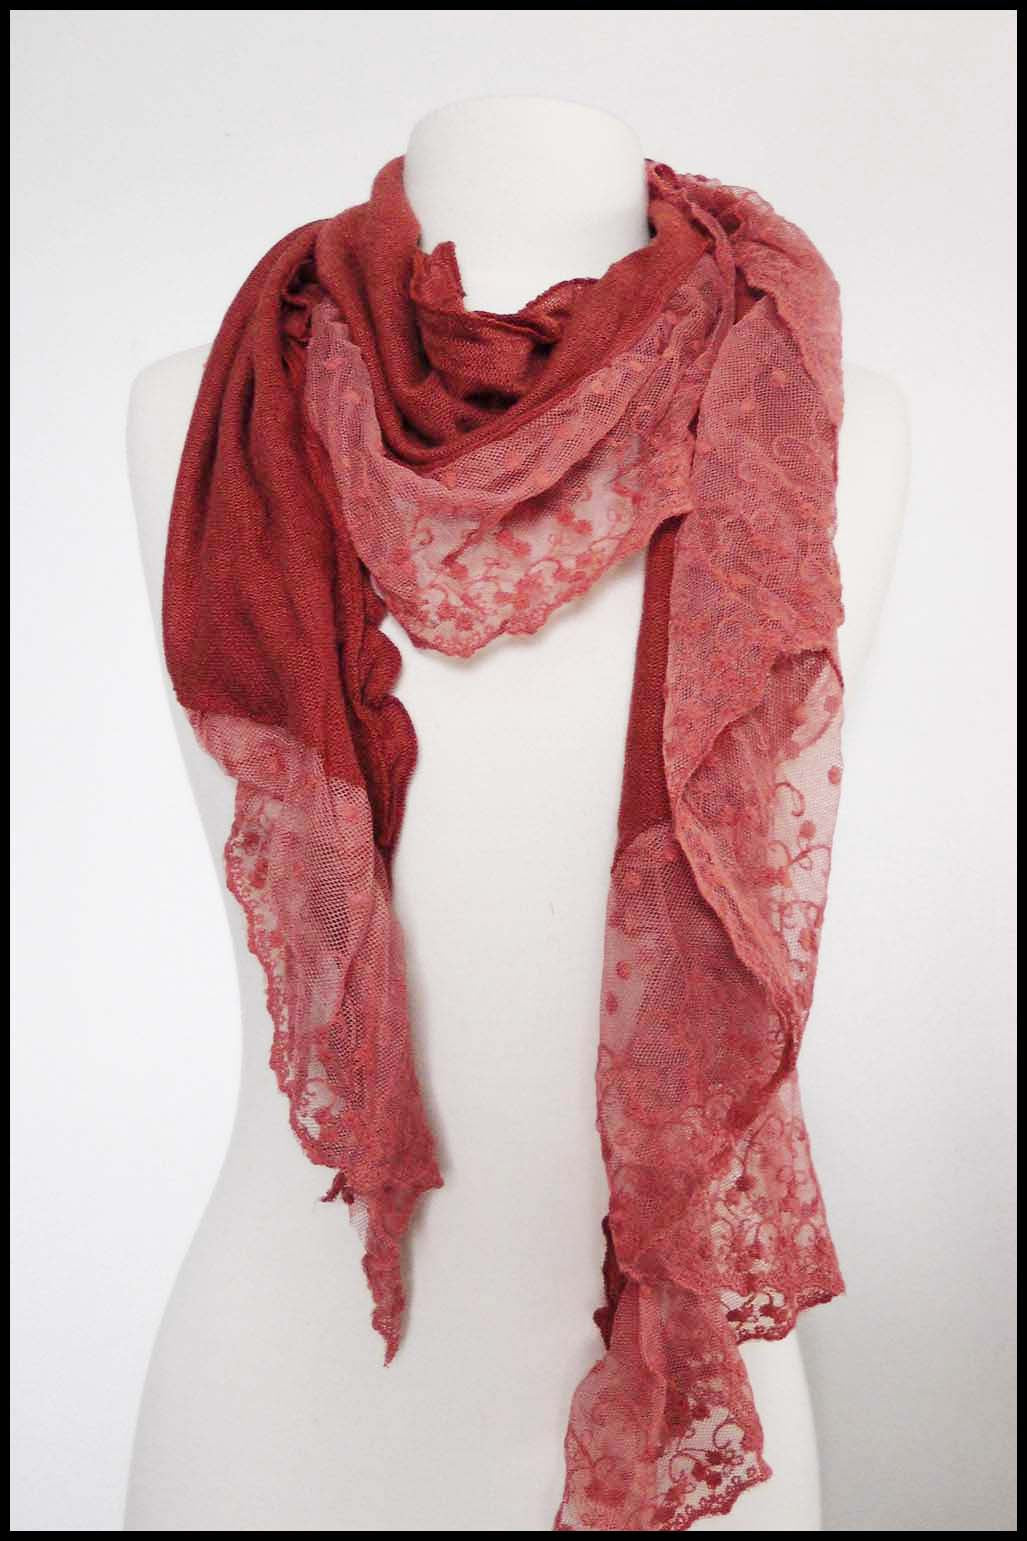 Romantic Mixed Knit and Lace Scarf